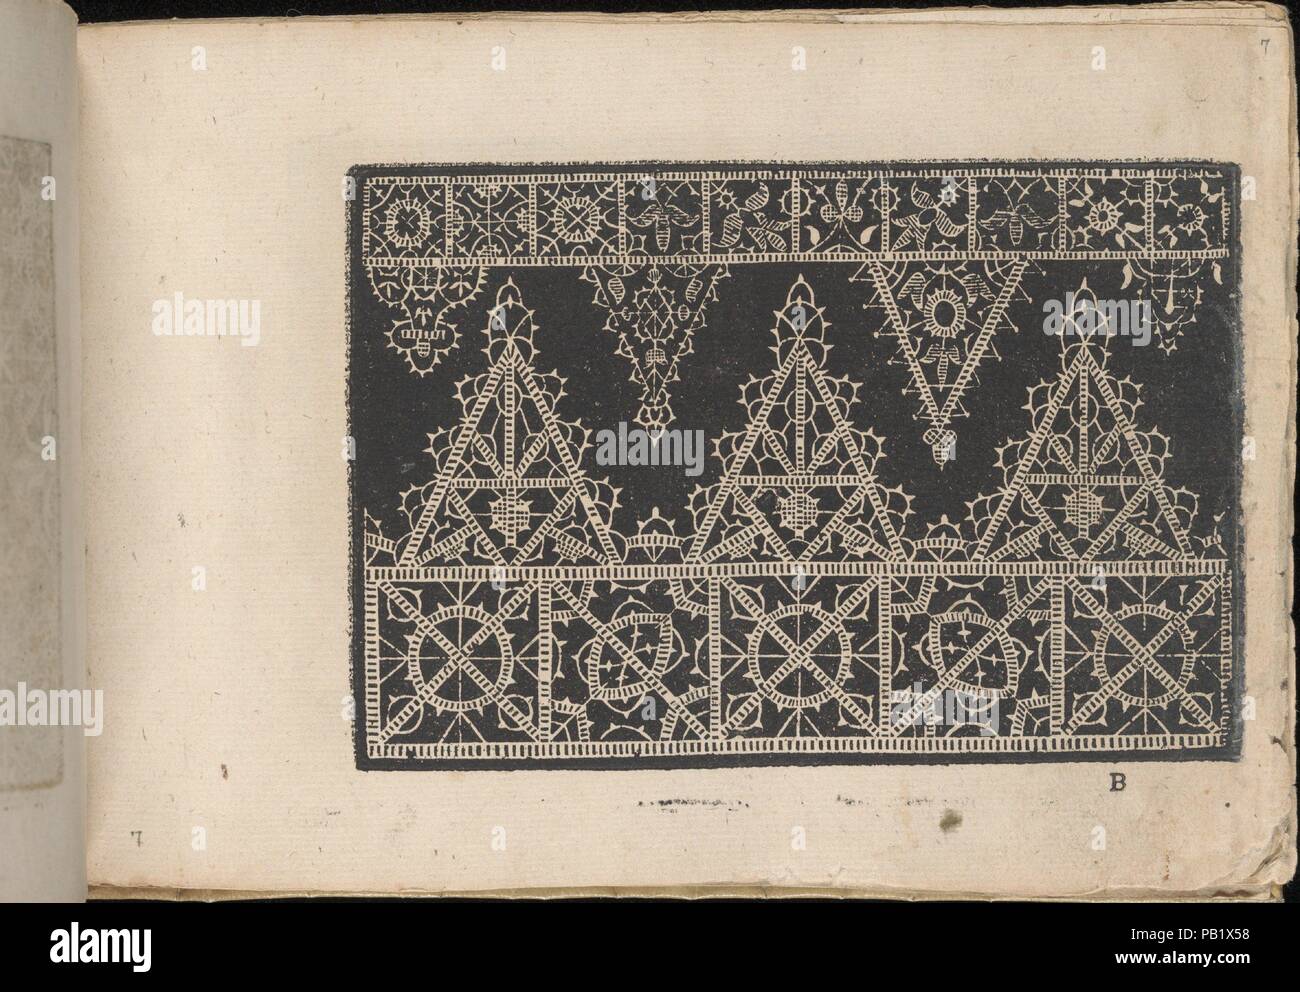 Fiori di Ricami Nuovamente Posti in Luce, page 7 (recto). Designer: Matteo Florimi (Italian, active Siena, ca. 1581-died 1613). Dimensions: Overall: 5 1/2 x 7 7/8 in. (14 x 20 cm). Published in: Venice. Publisher: Francesco de' Franceschi (Italian, active 16th century) , Venice. Date: 1591.  Designed by Matteo Florimi, Italian, active Siena, ca. 1581-died 1613, published by Francesco de' Franceschi, Italian, active 16th century, Venice.  From top to bottom, and left to right:  Design composed of 3 horizontal registers. Top register is decorated with squares ornamented with a different floral m Stock Photo